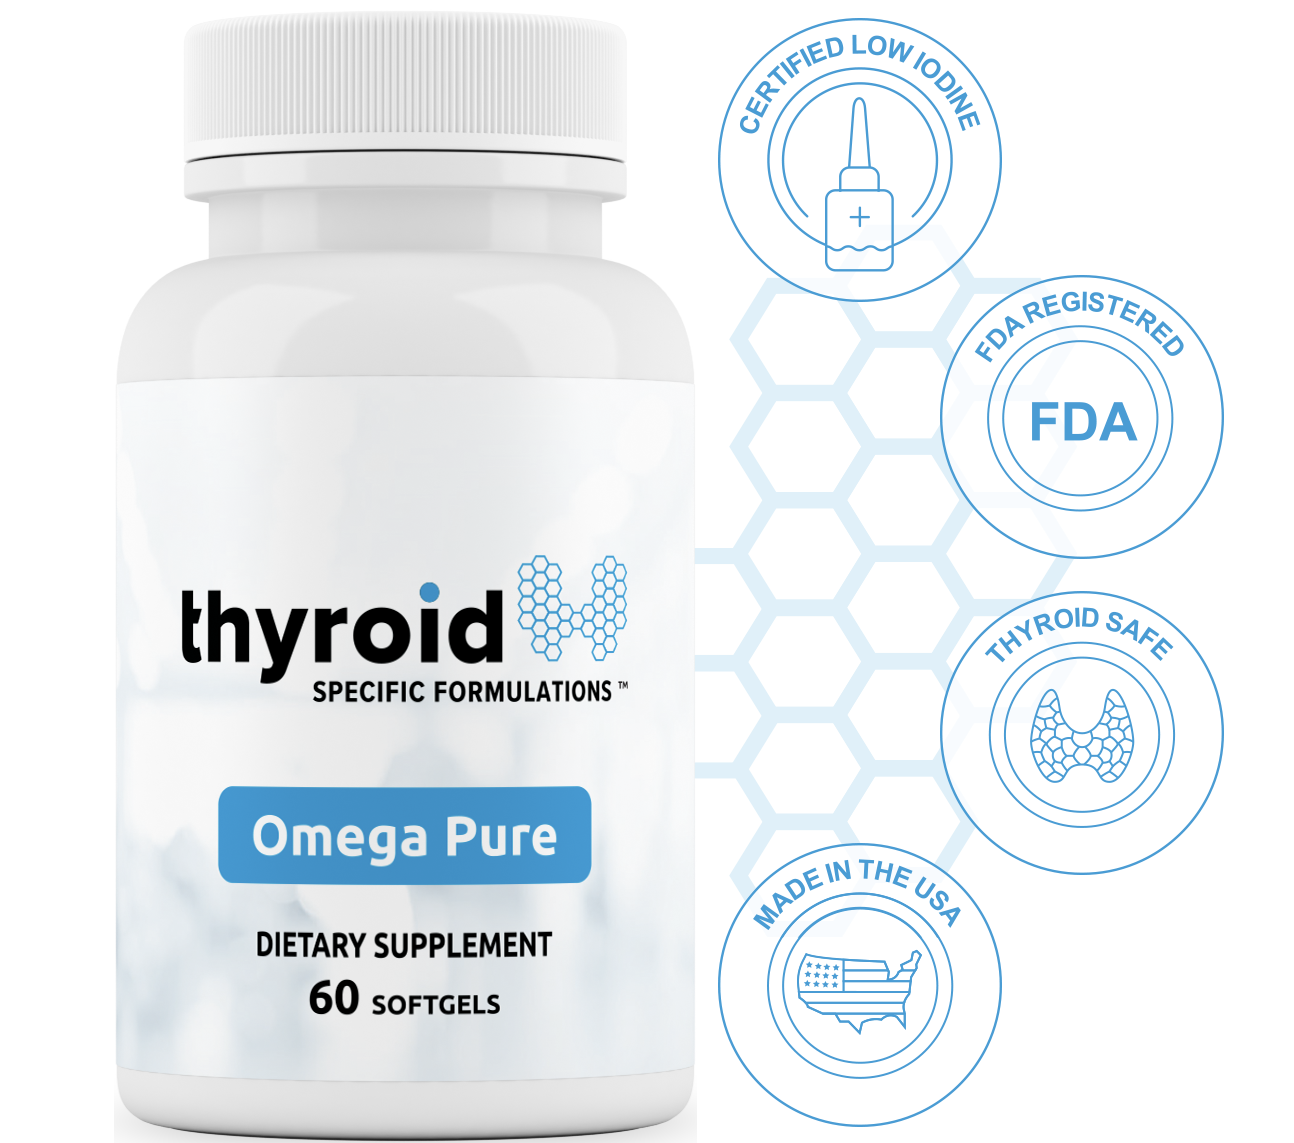 Thyroid Specific Formulations